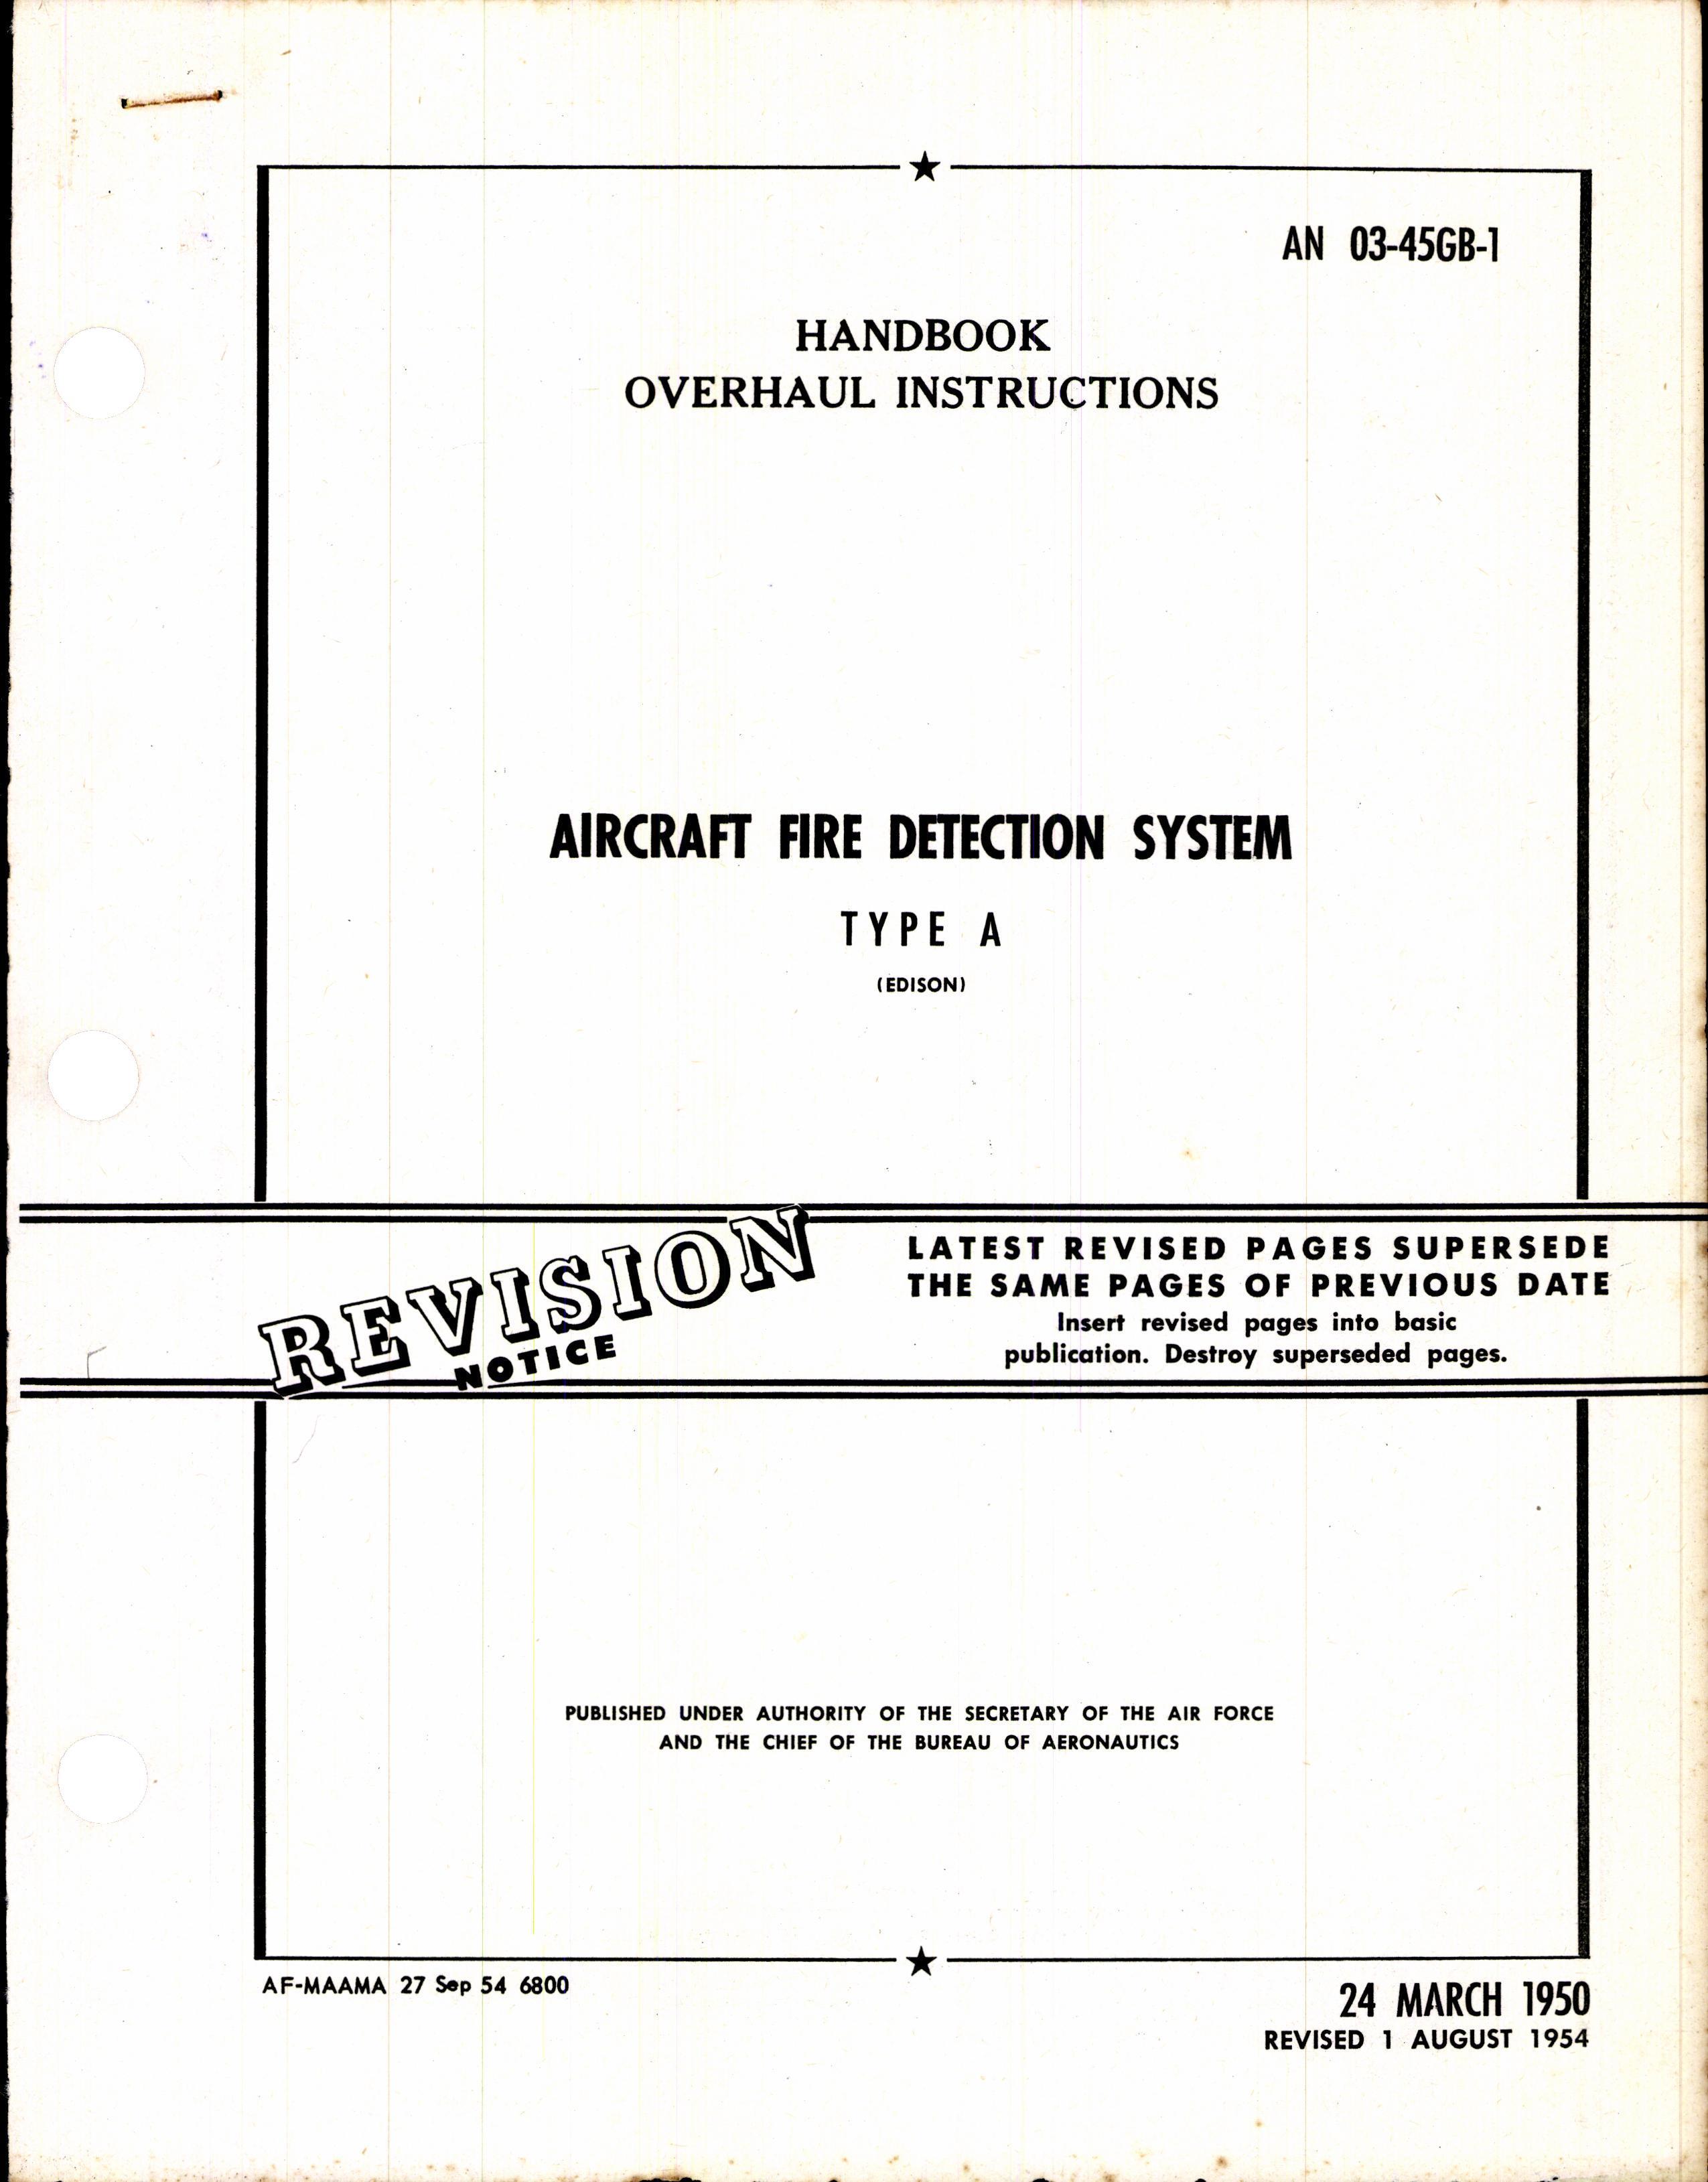 Sample page 1 from AirCorps Library document: Overhaul Instructions for Aircraft Fire Detection System Type A